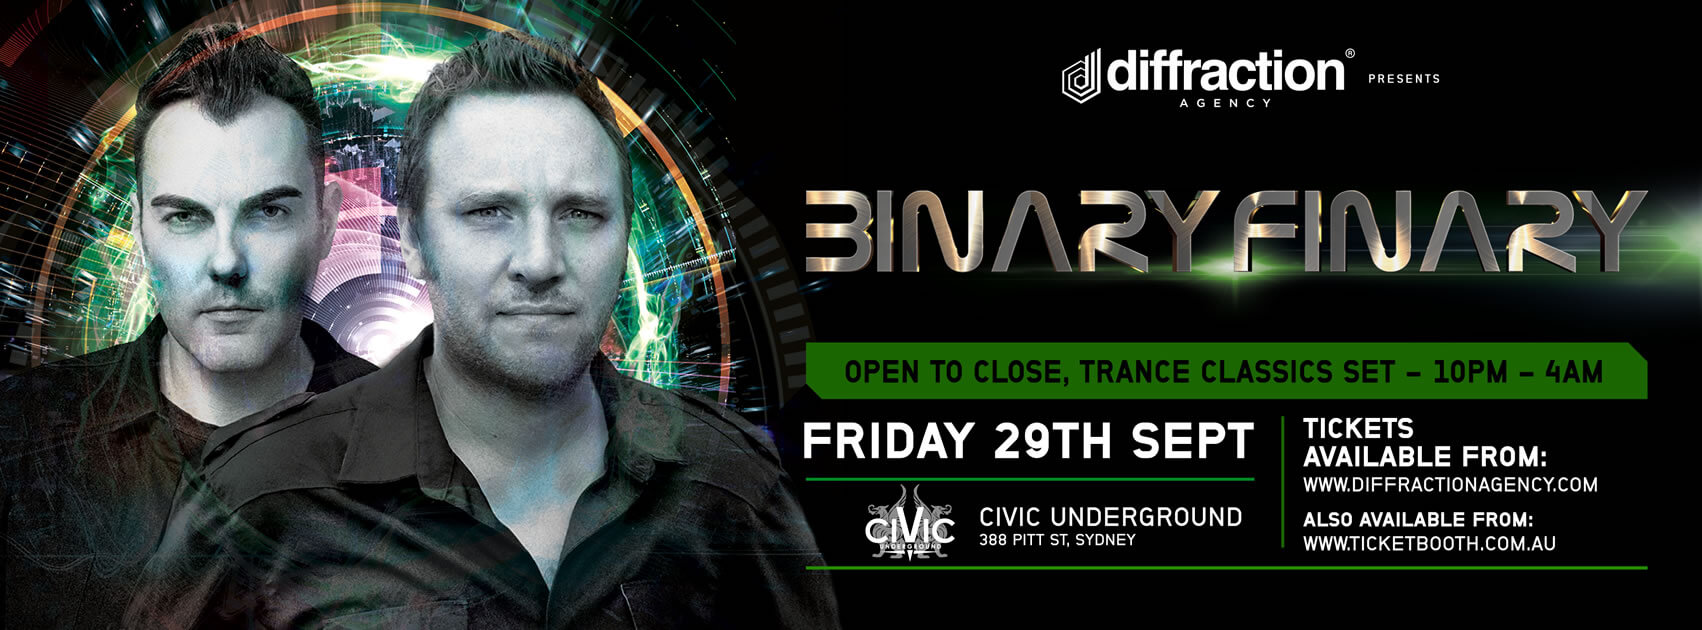 Diffraction Agency presents Binary Finary at Civic Underground, Sydney, Australia on 29th of September 2017 banner